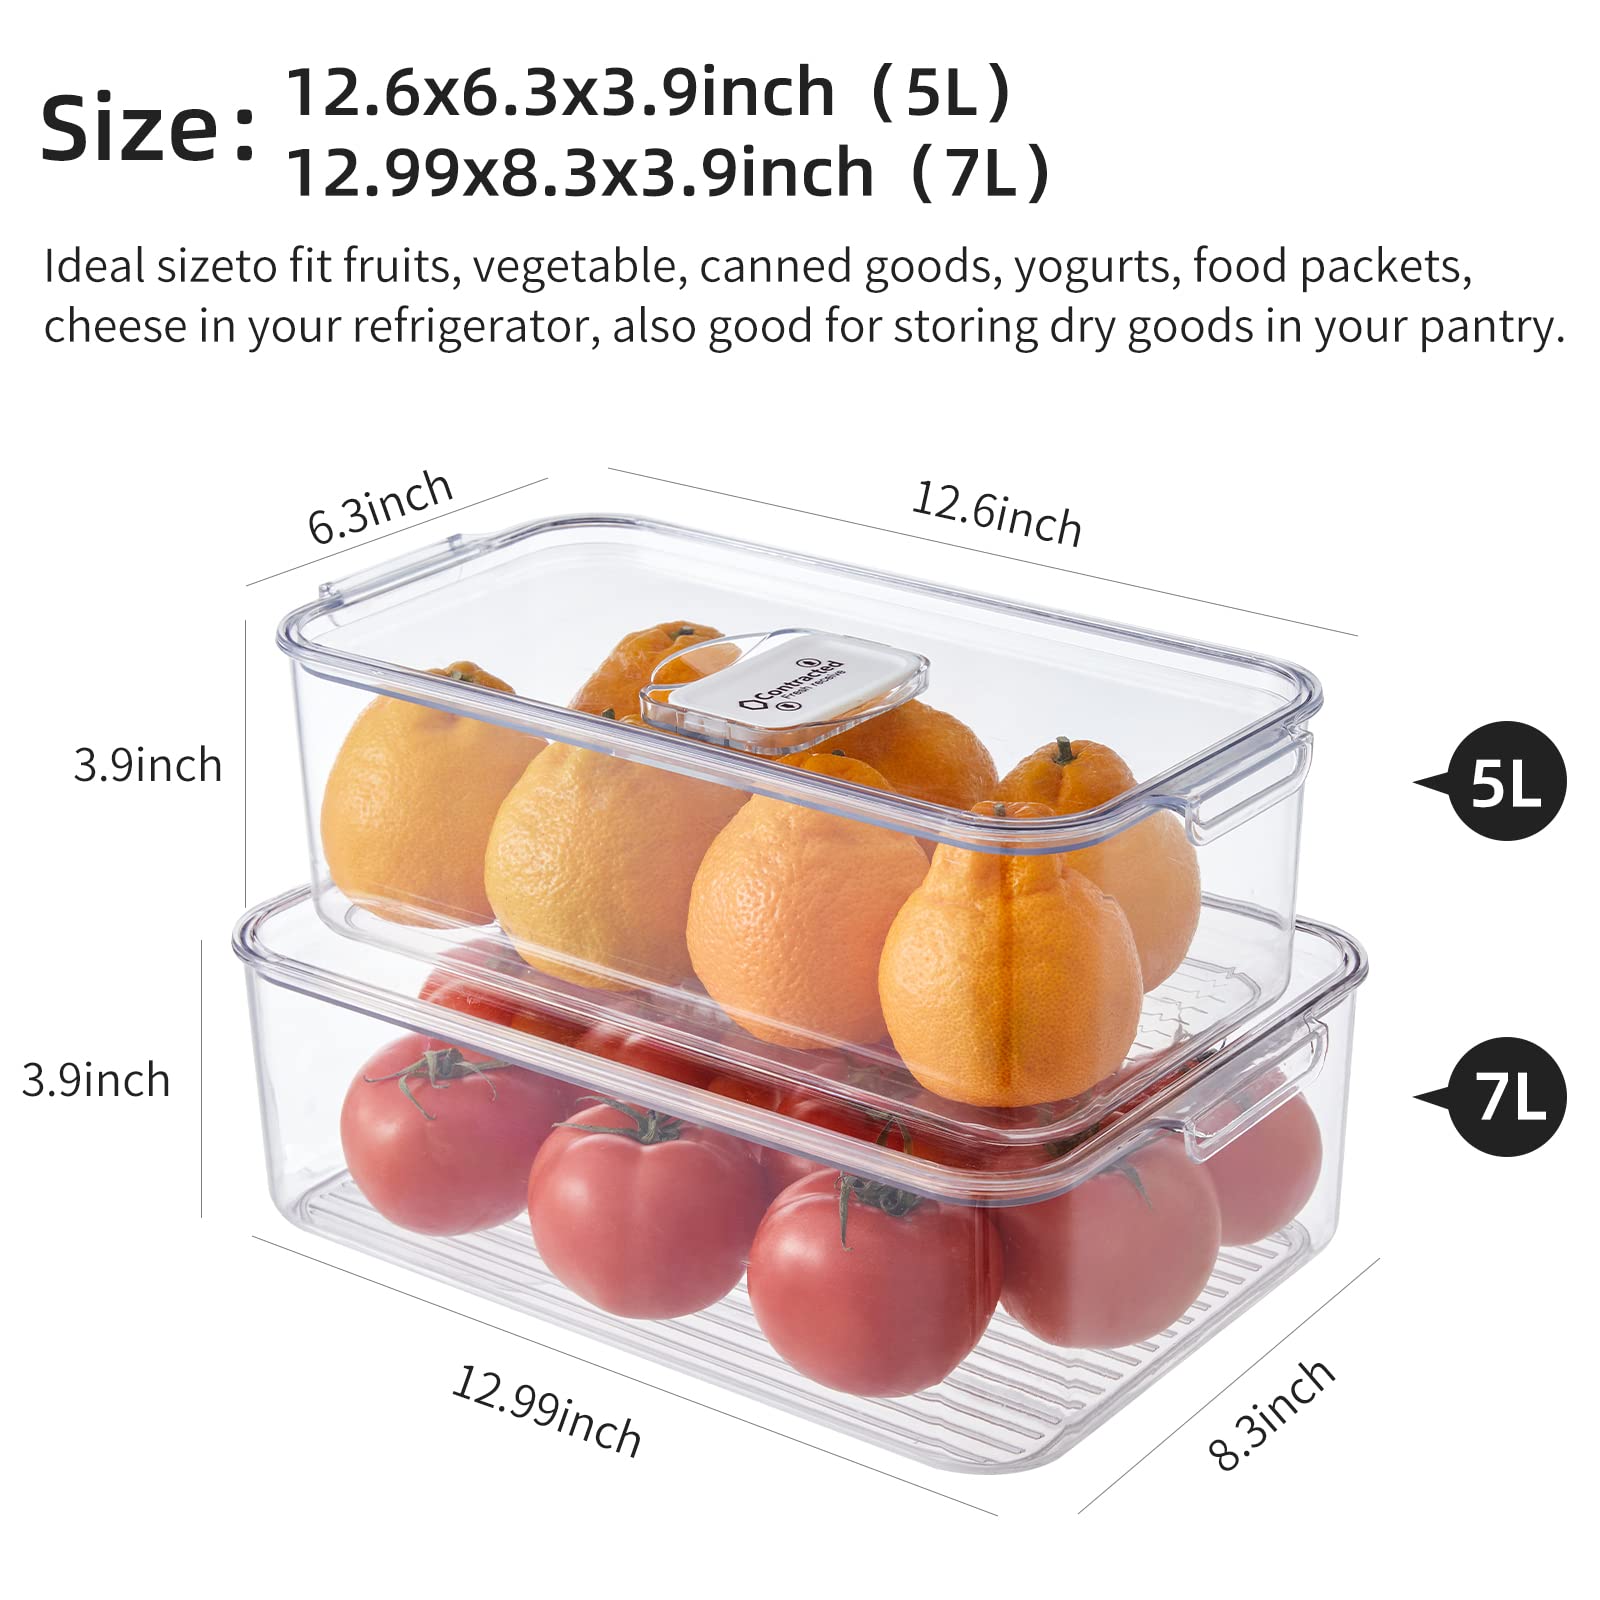 VELMADE Food Storage Containers with Lids 2 PCs, Airtight Food Containers for Kitchen Organization, Pantry Storage for Fridge, Refrigerator & Freezer, Fresh Keeper with Steam Vents, Clear